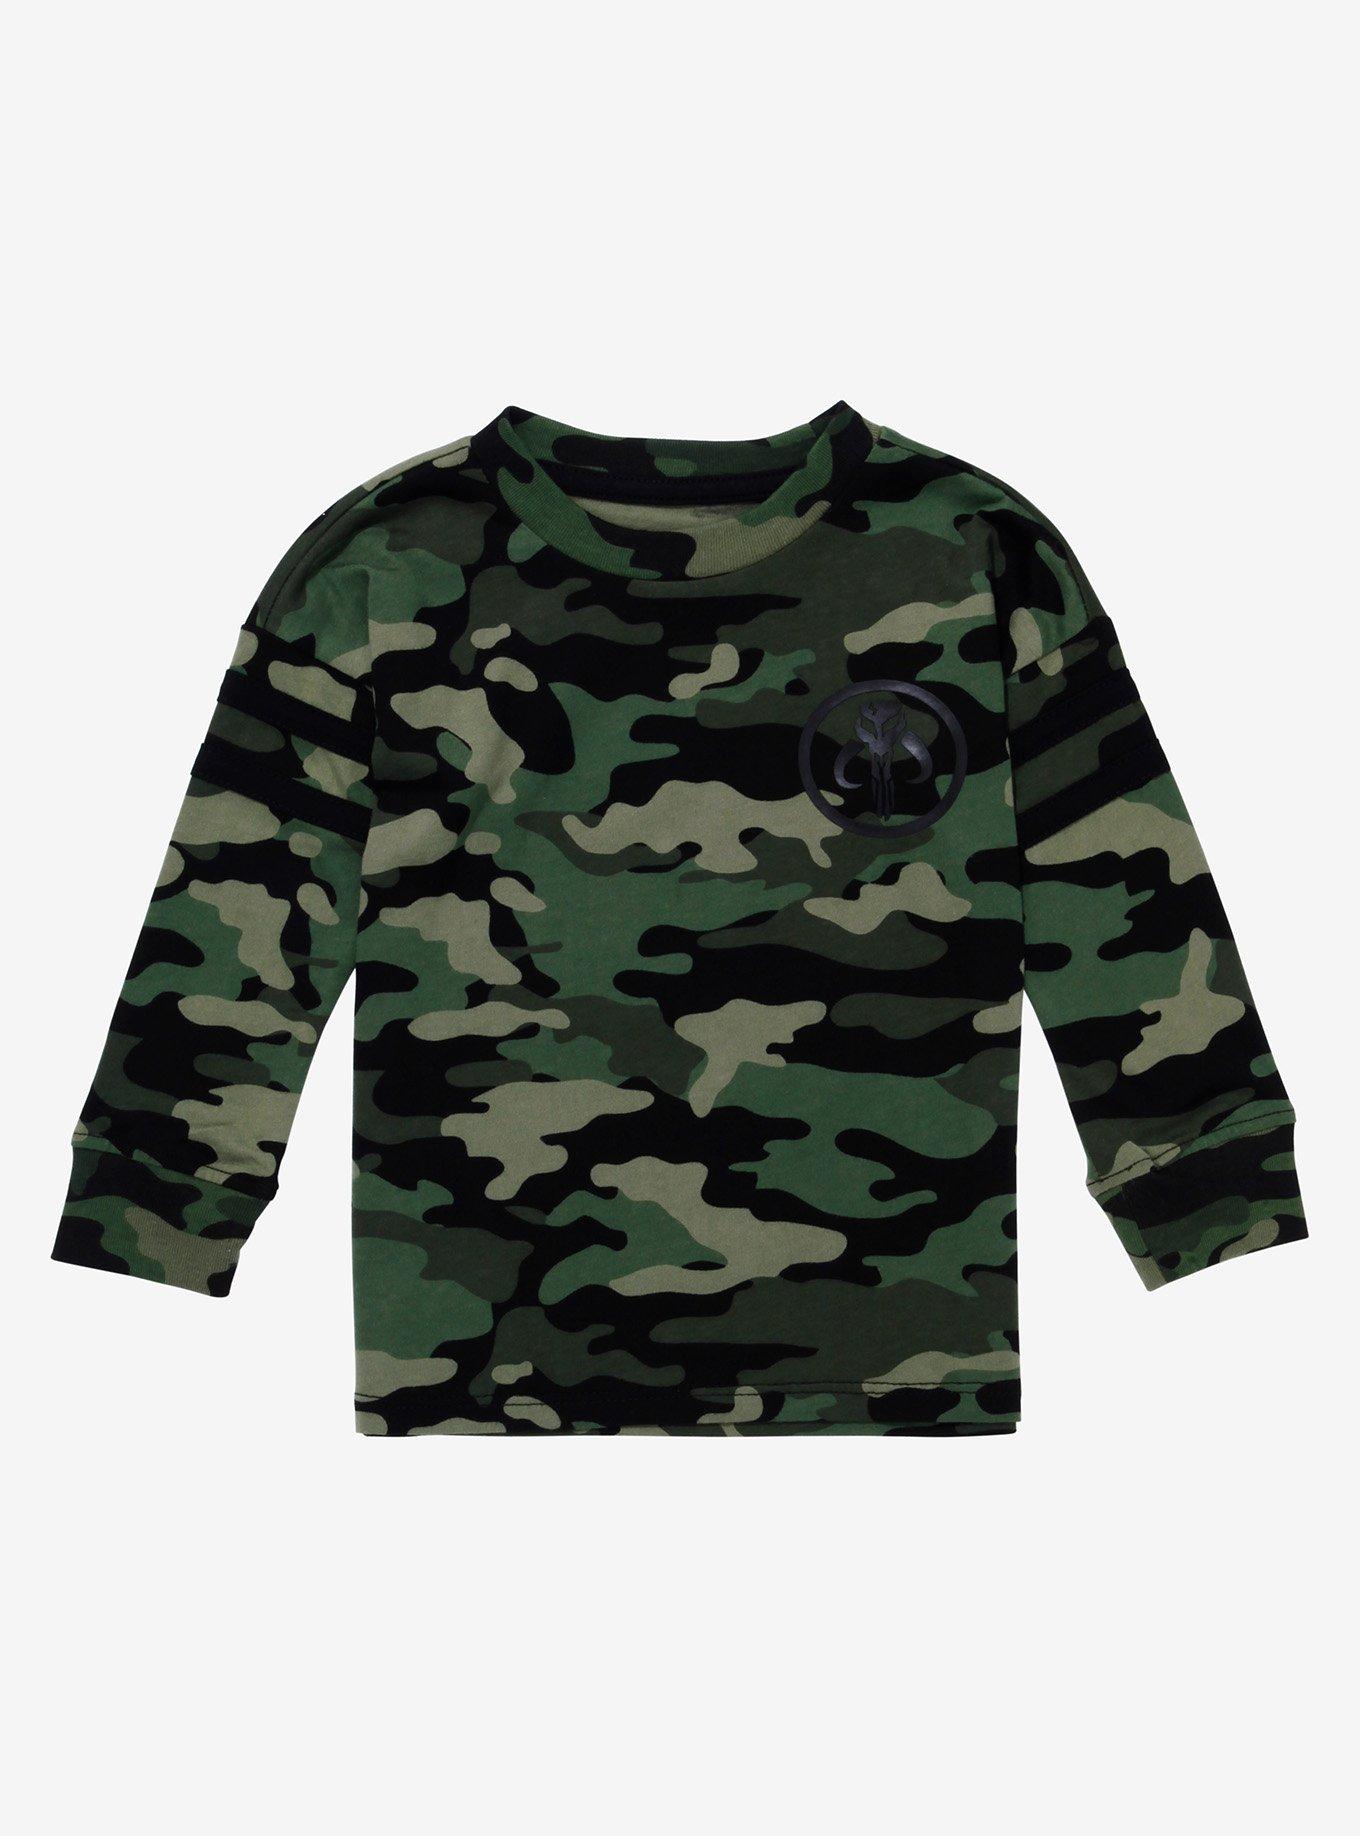 Our Universe Star Wars Mandalore Camouflage Toddler Hype Jersey ...